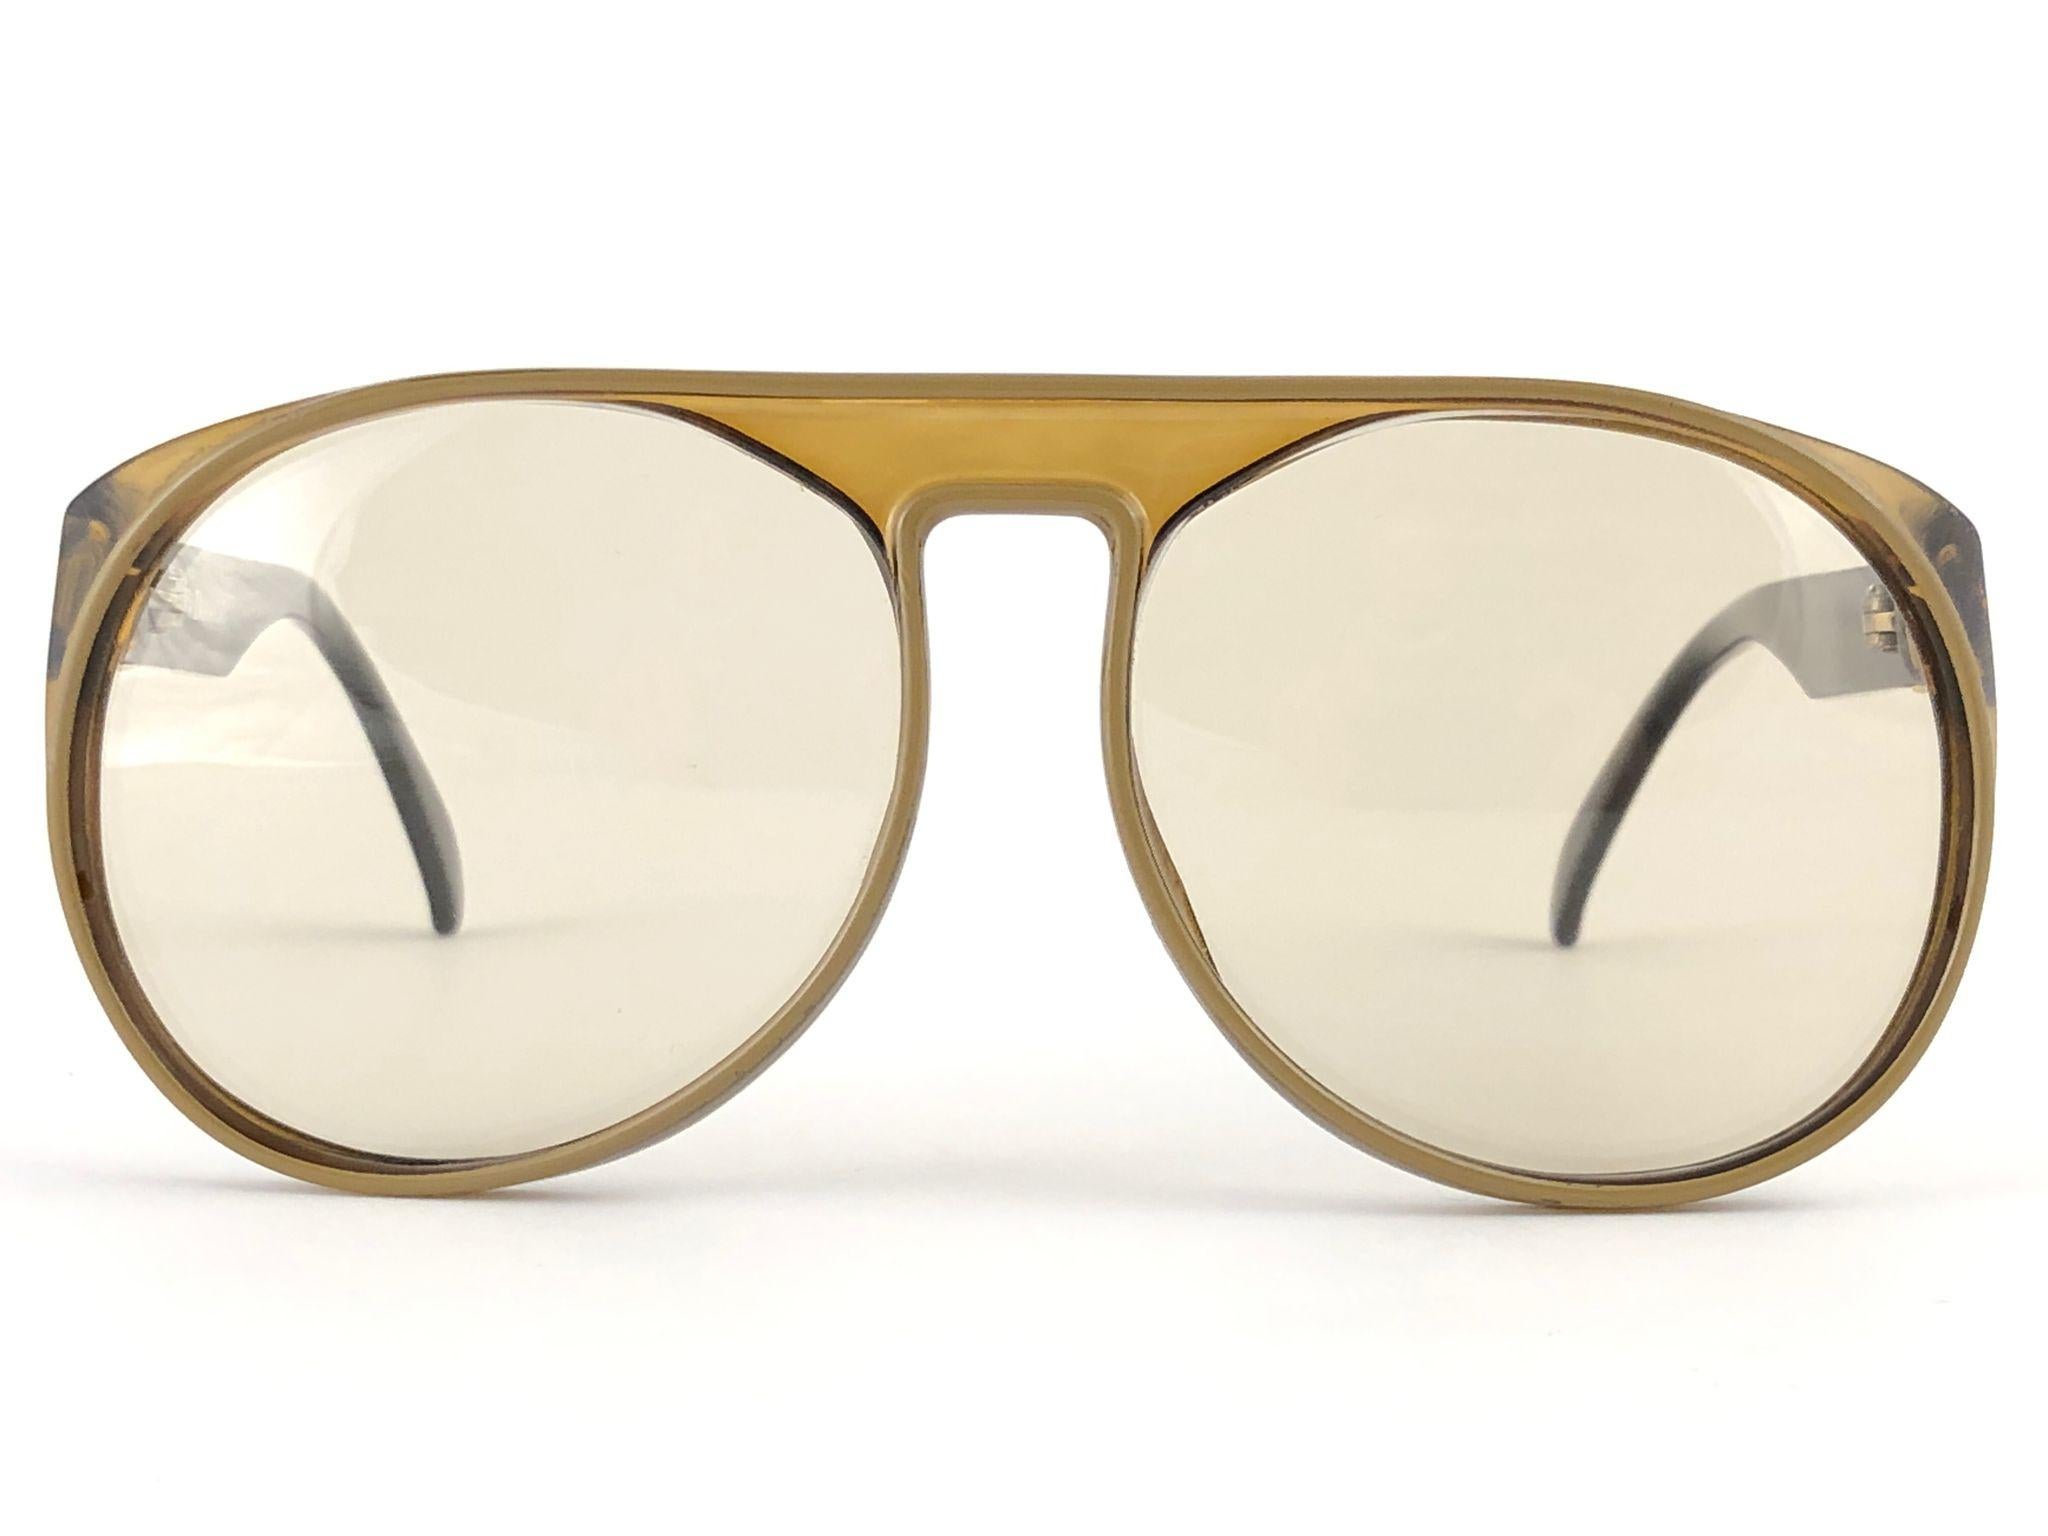 New vintage Christian Dior Monsieur translucent amber frame.

Spotless light brown lenses.

New, never worn or displayed this item may show light sign of wear due to storage.

Made in Austria

Front : 14.5 cms

Lens Height : 5.6 cms

Lens Width :